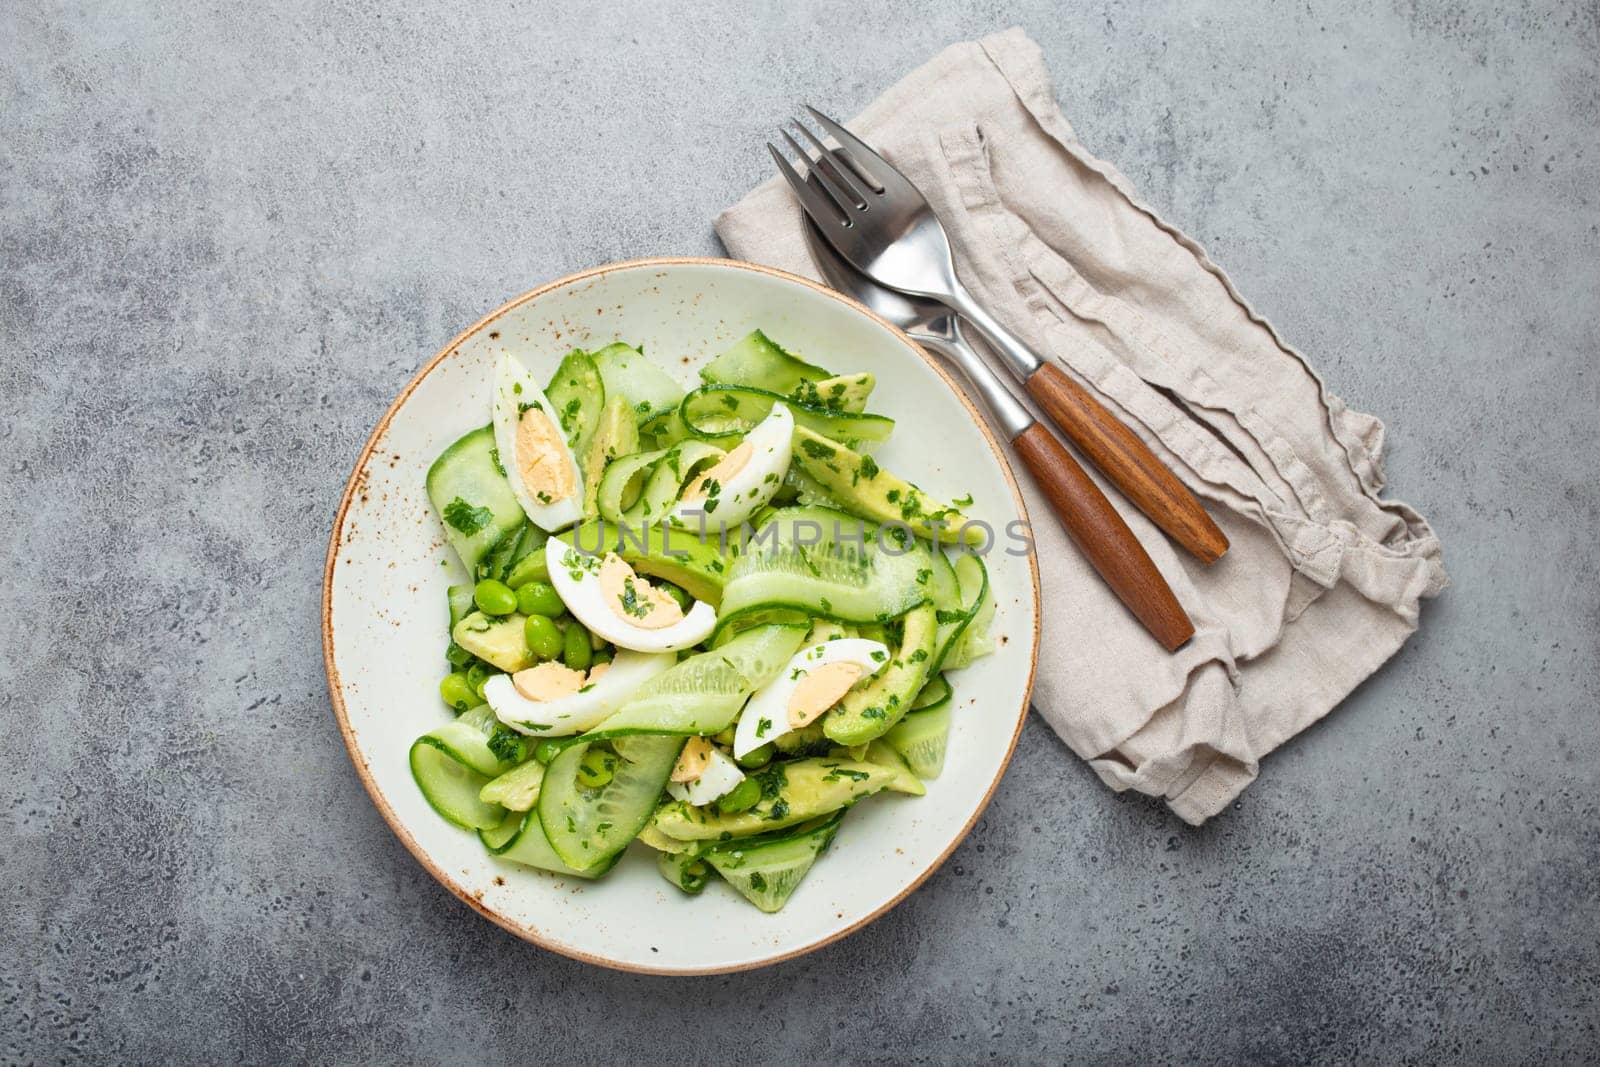 Healthy green avocado salad bowl with boiled eggs, sliced cucumbers, edamame beans, olive oil and herbs on ceramic plate top view on grey stone rustic table background